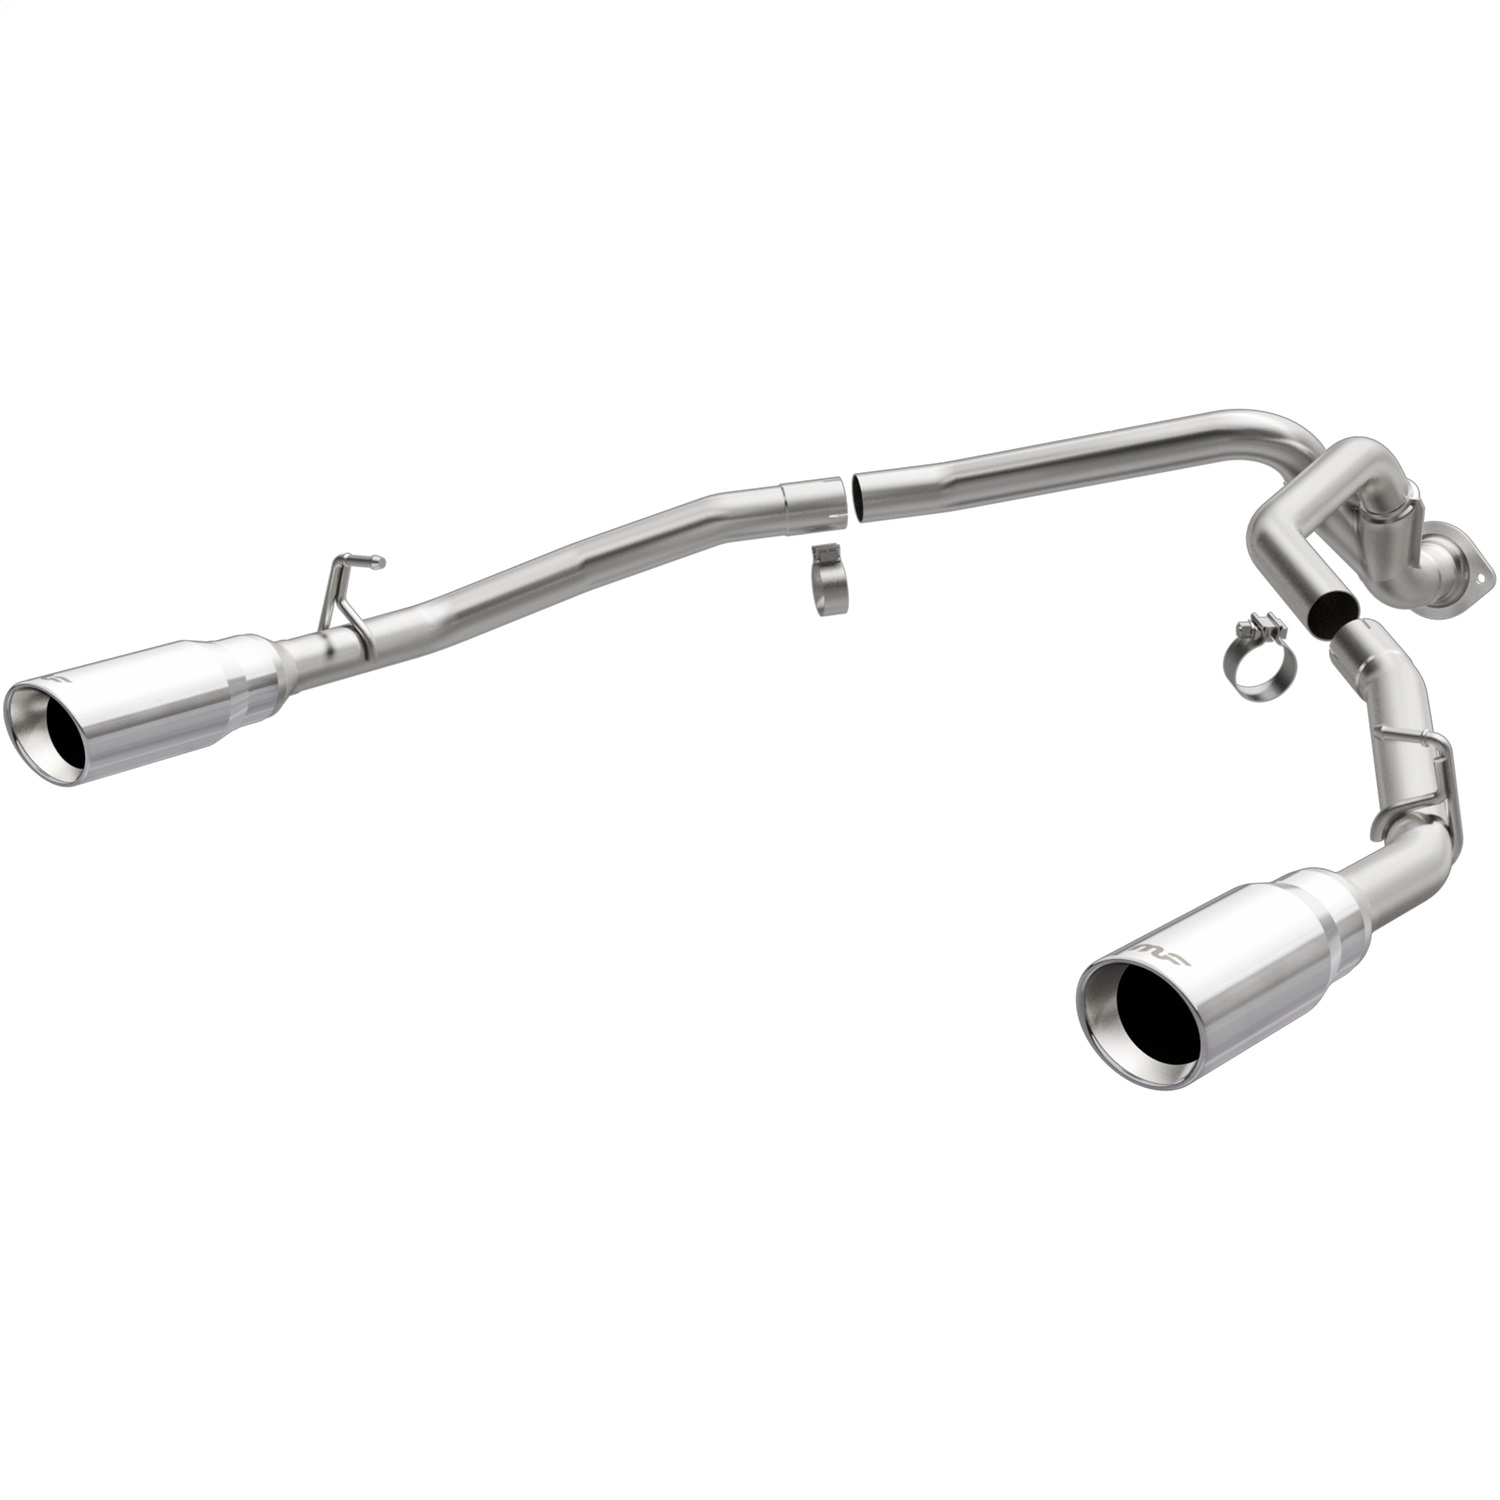 Magnaflow Performance Dual Exhaust Kit 19508 for 2020-2021 Ram 1500 3